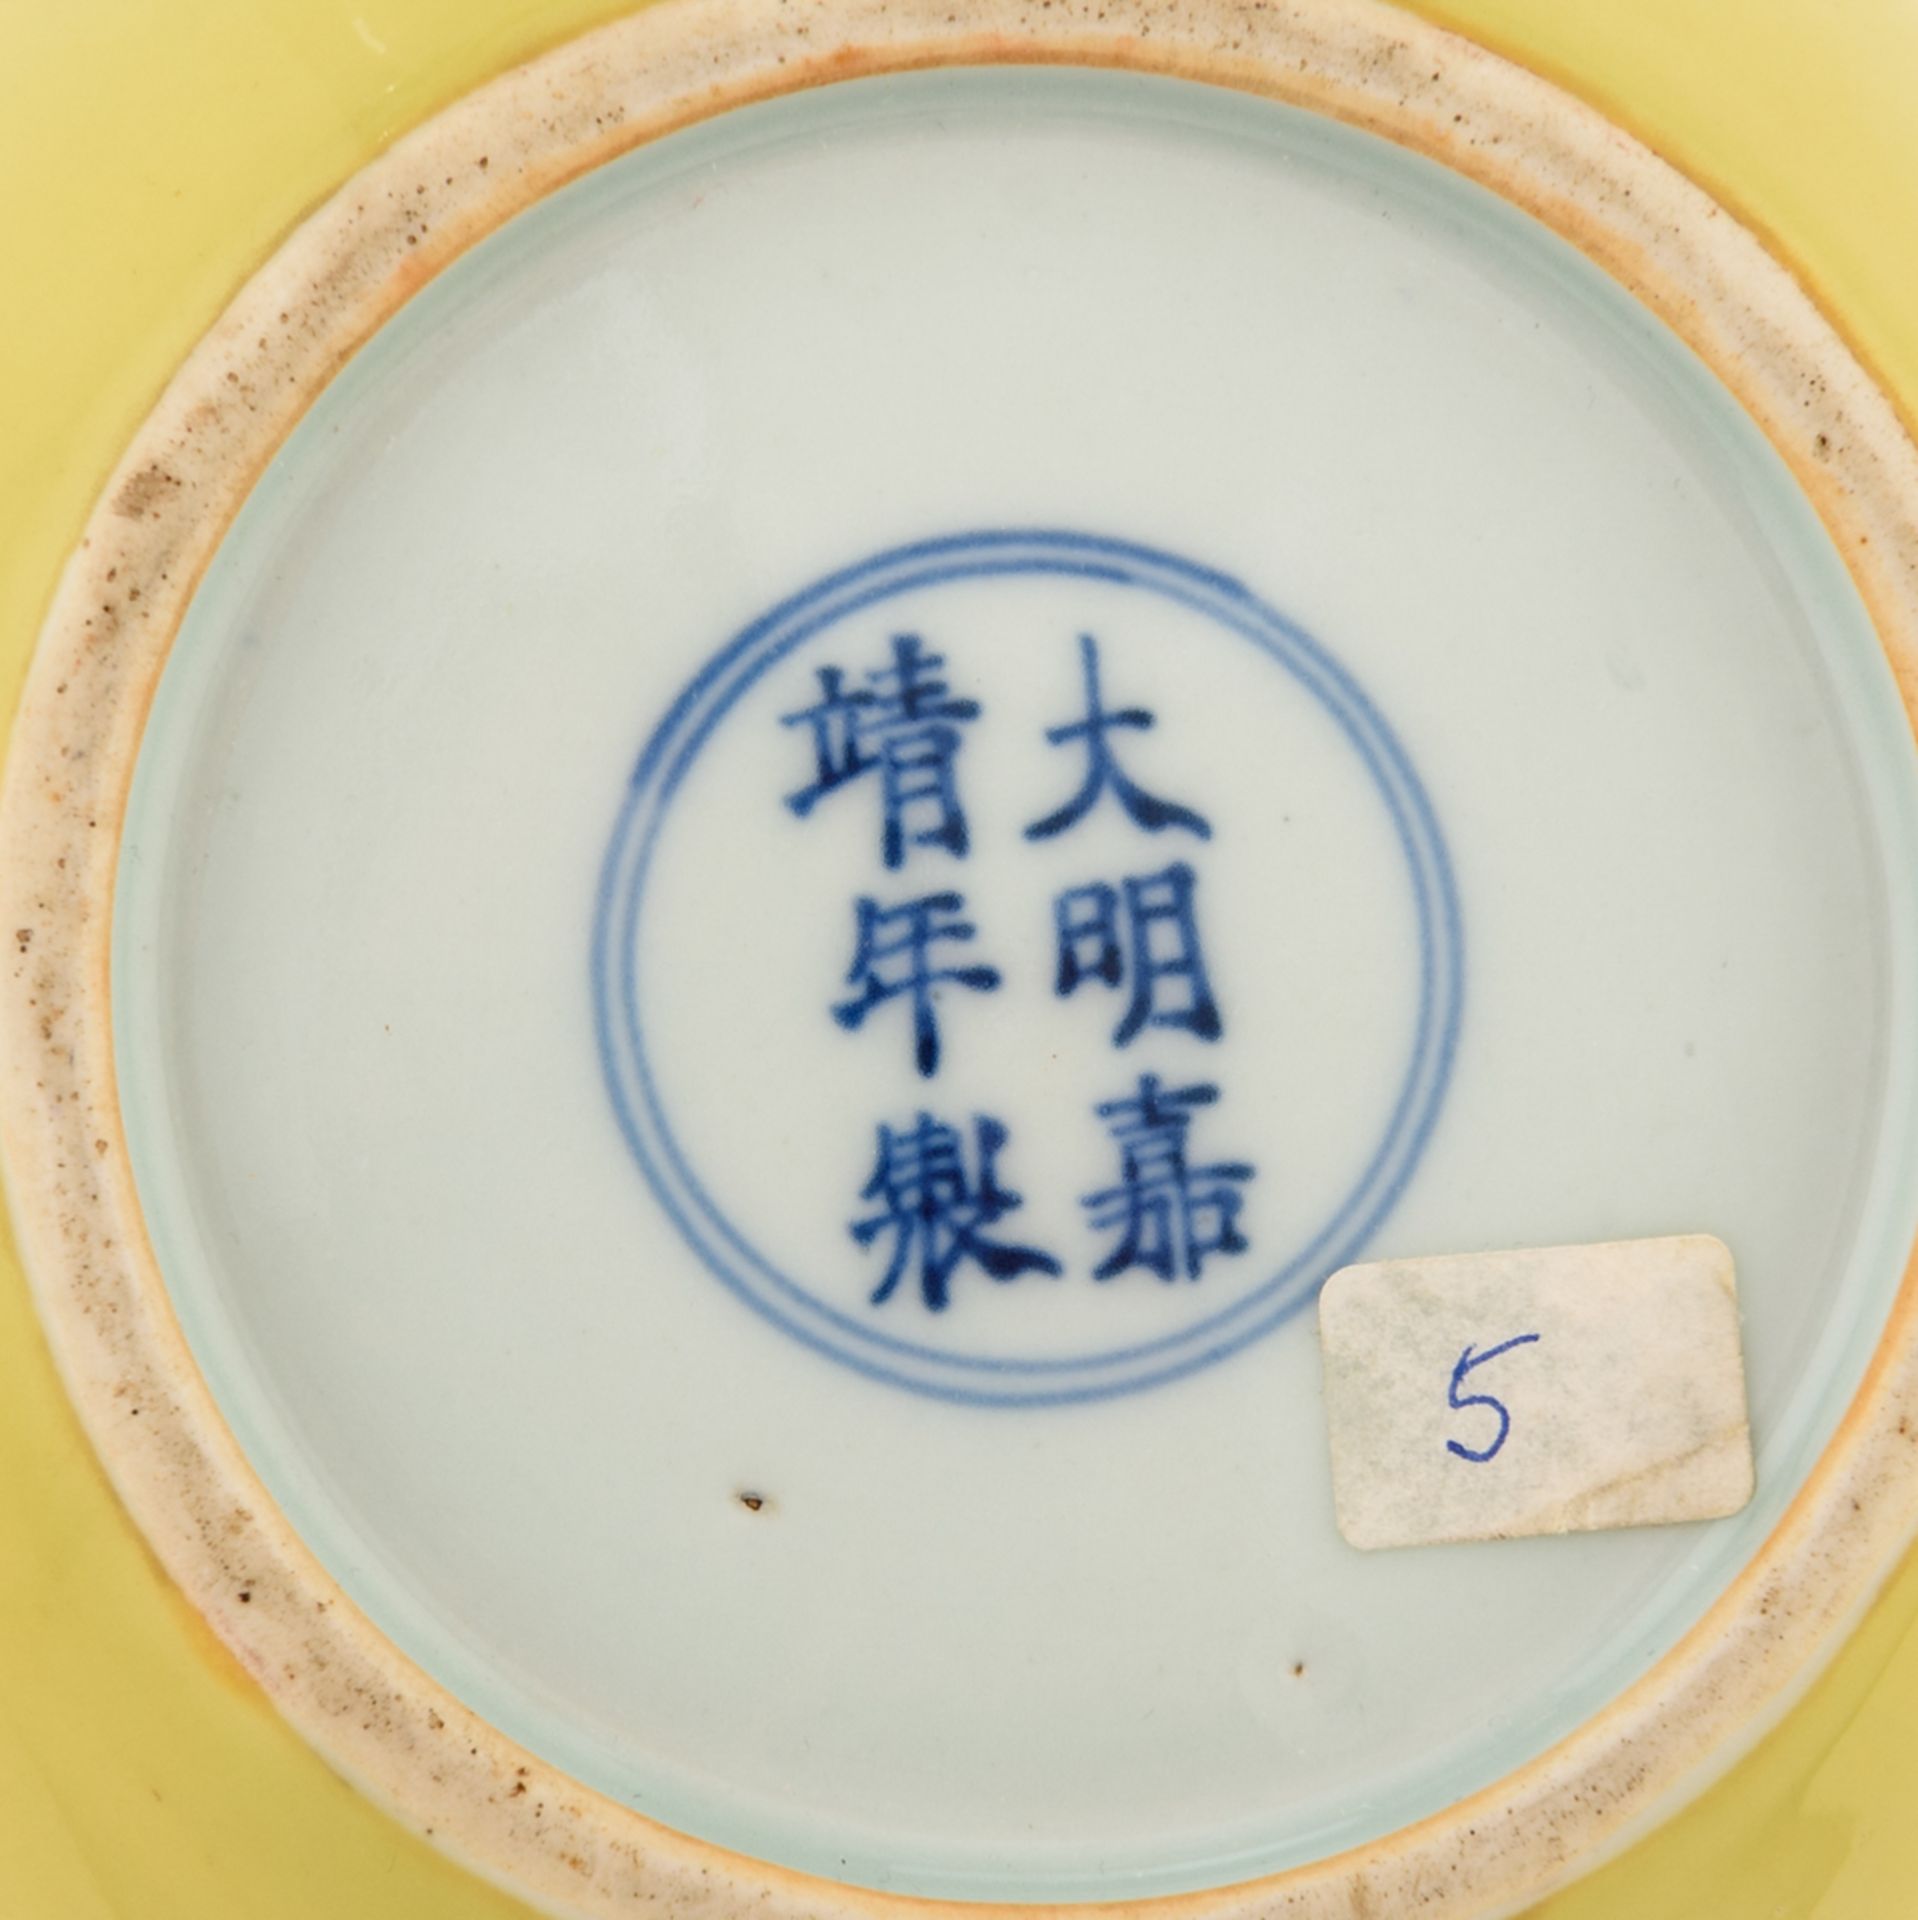 A Chinese yellow crackle-glazed jar, with a Jiajing mark, H 13 - ø 15 cm - Image 8 of 9